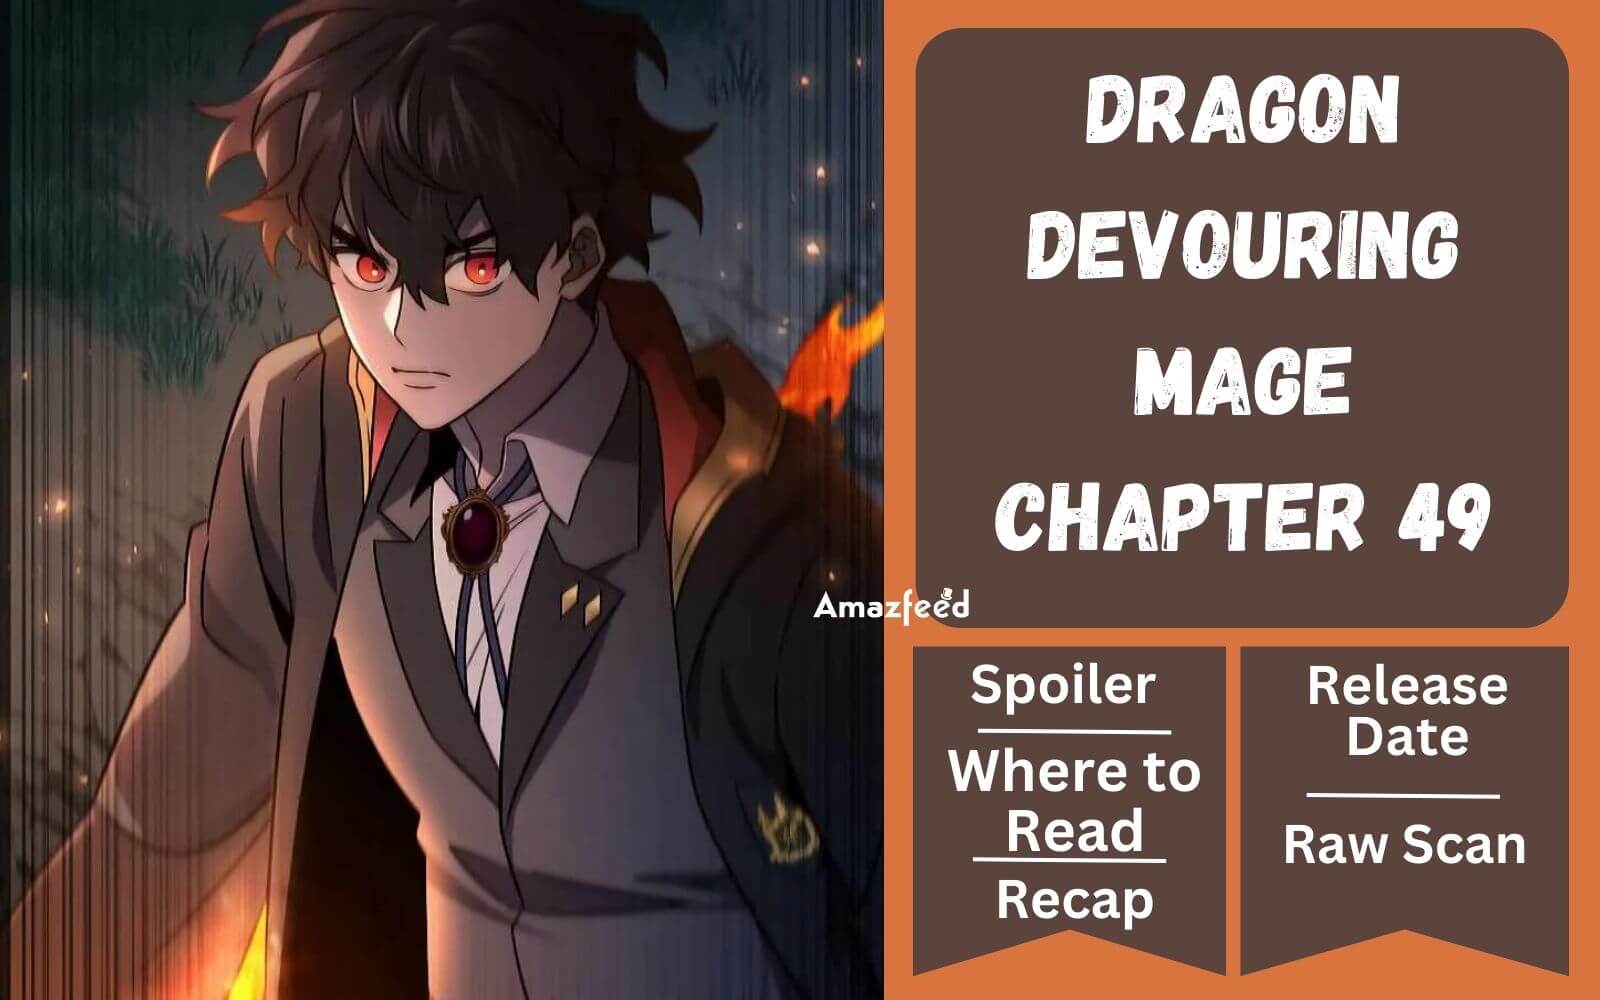 Dragon-Devouring Mage Chapter 49